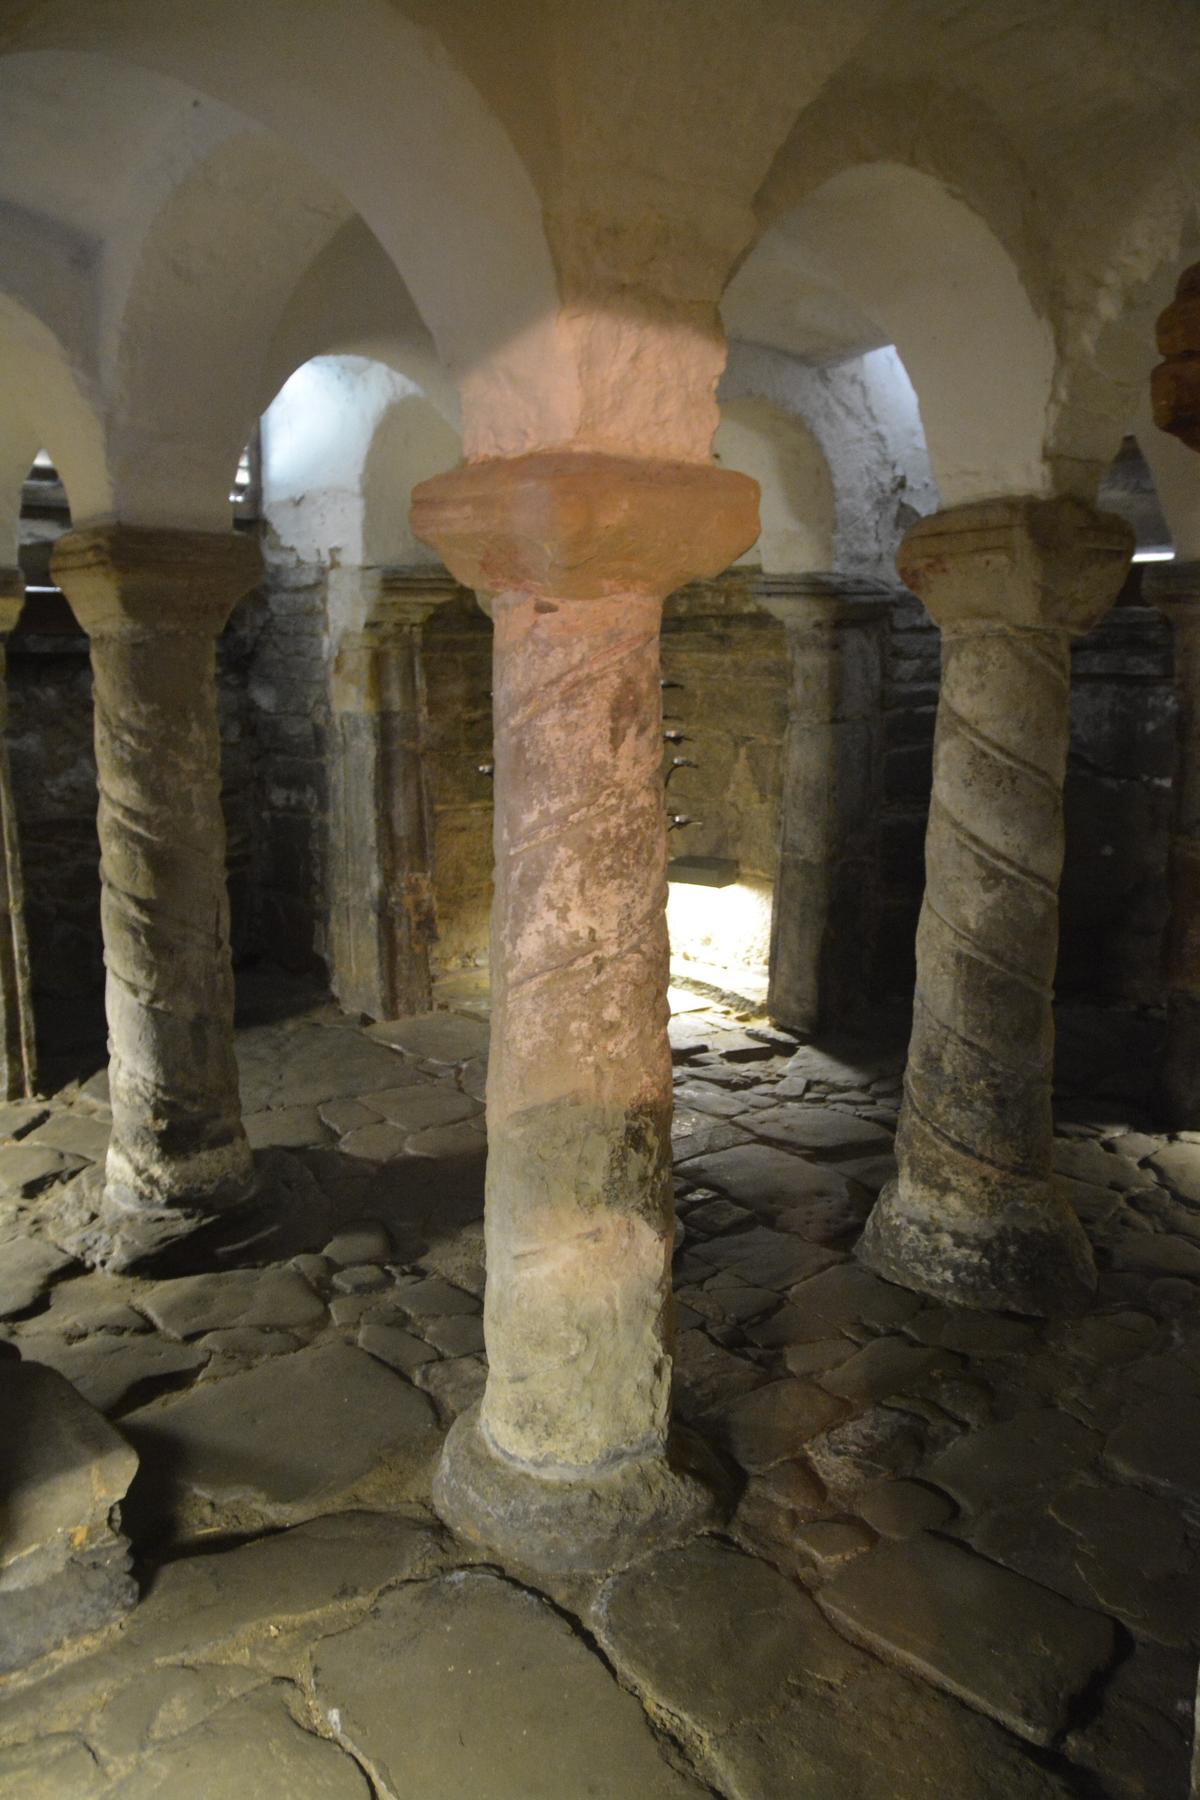 The Saxon crypt at Repton church shows similarities to the Anchor Church Caves nearby. (Courtesy of Mark Horton/Royal Agricultural University)